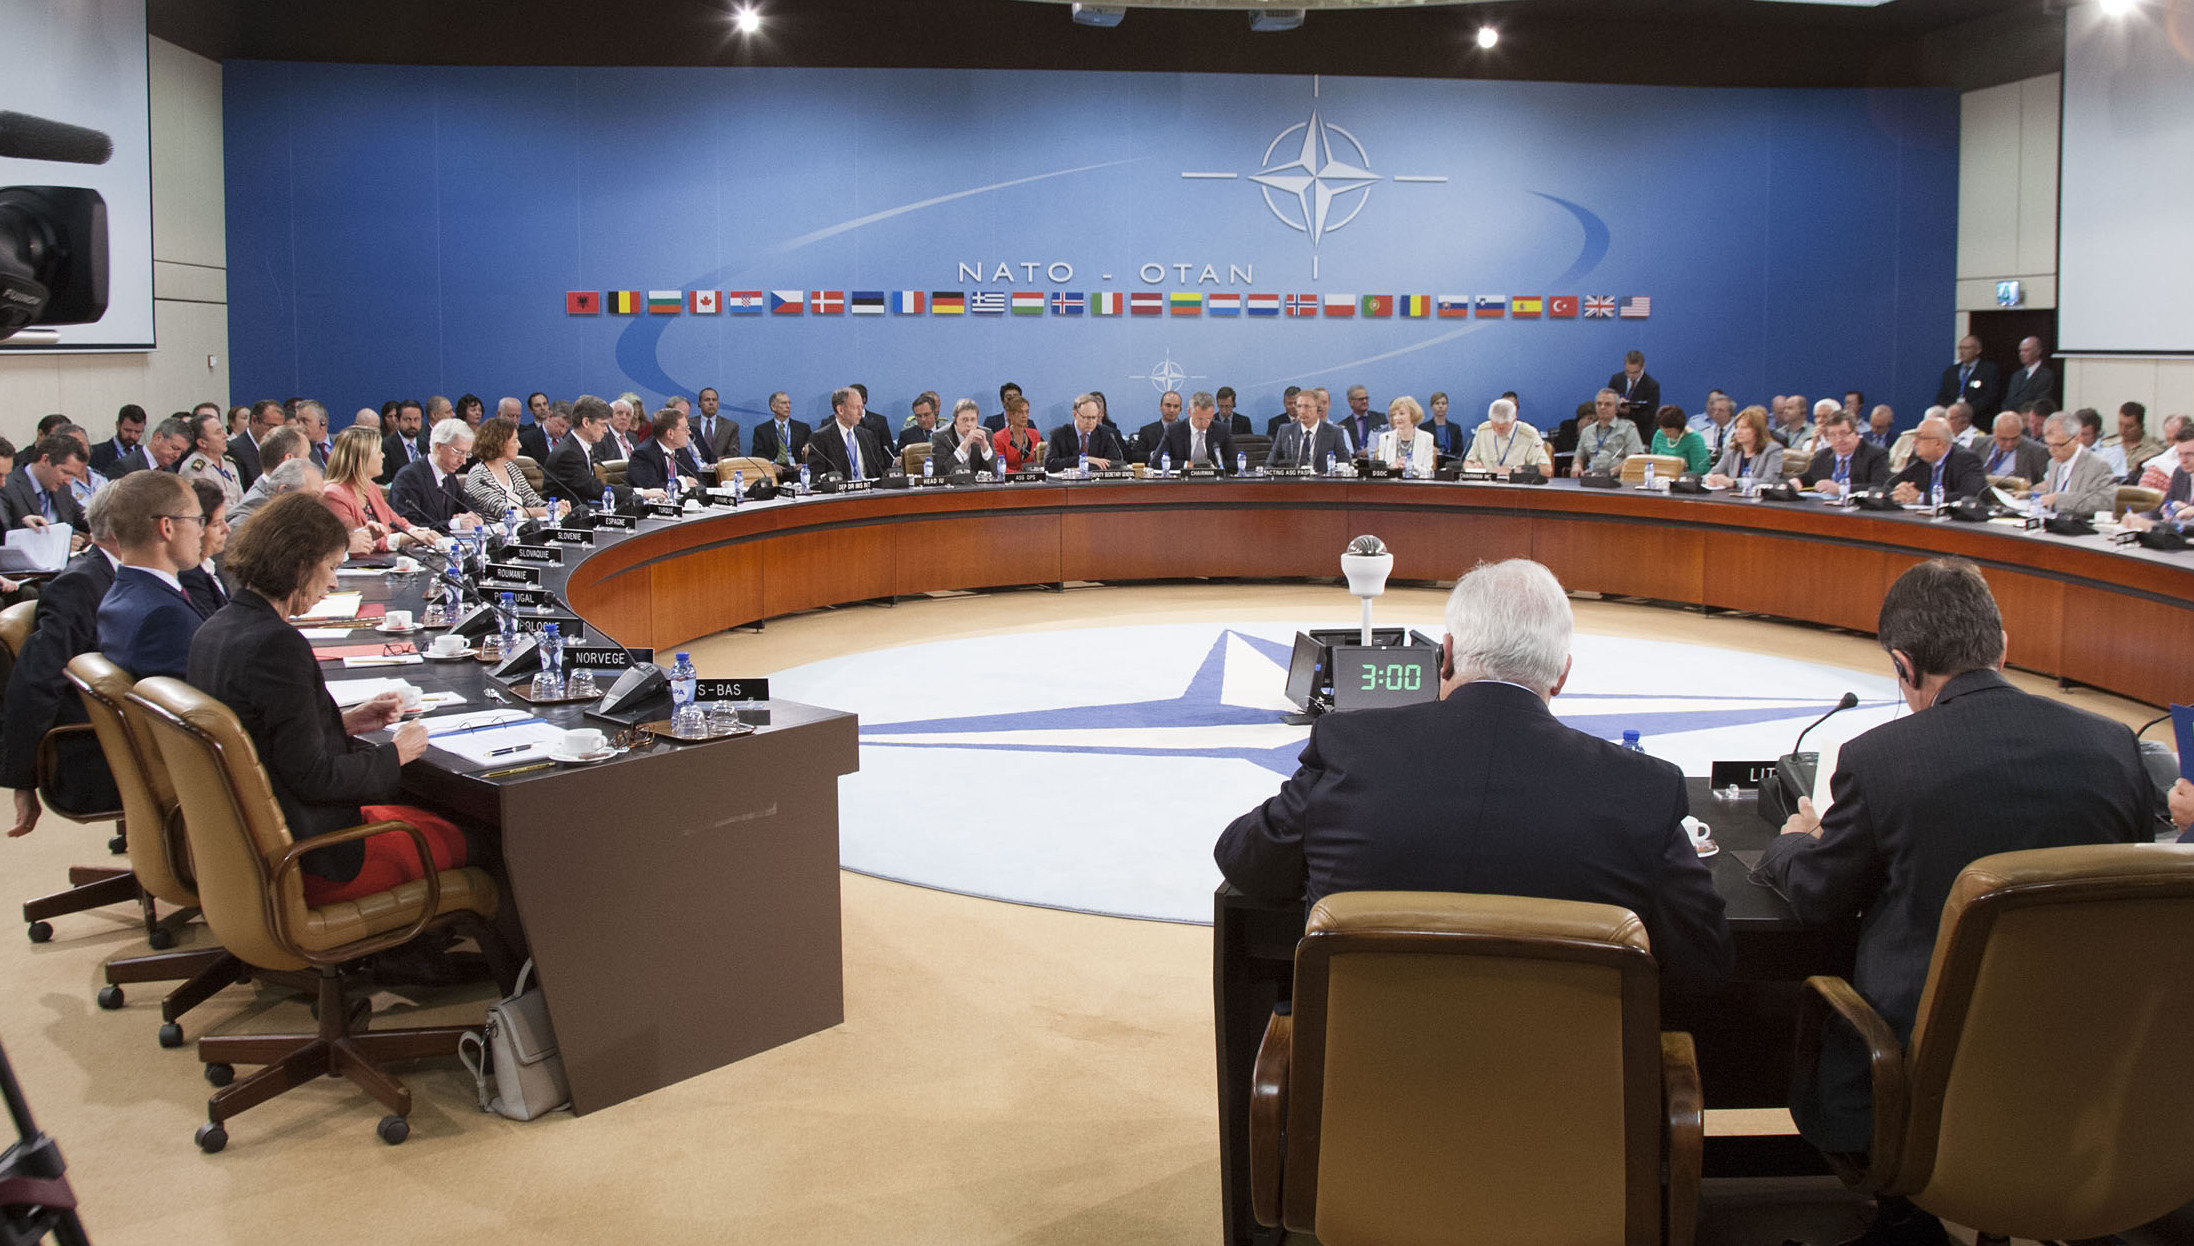 NATO's meeting following Turkey's request